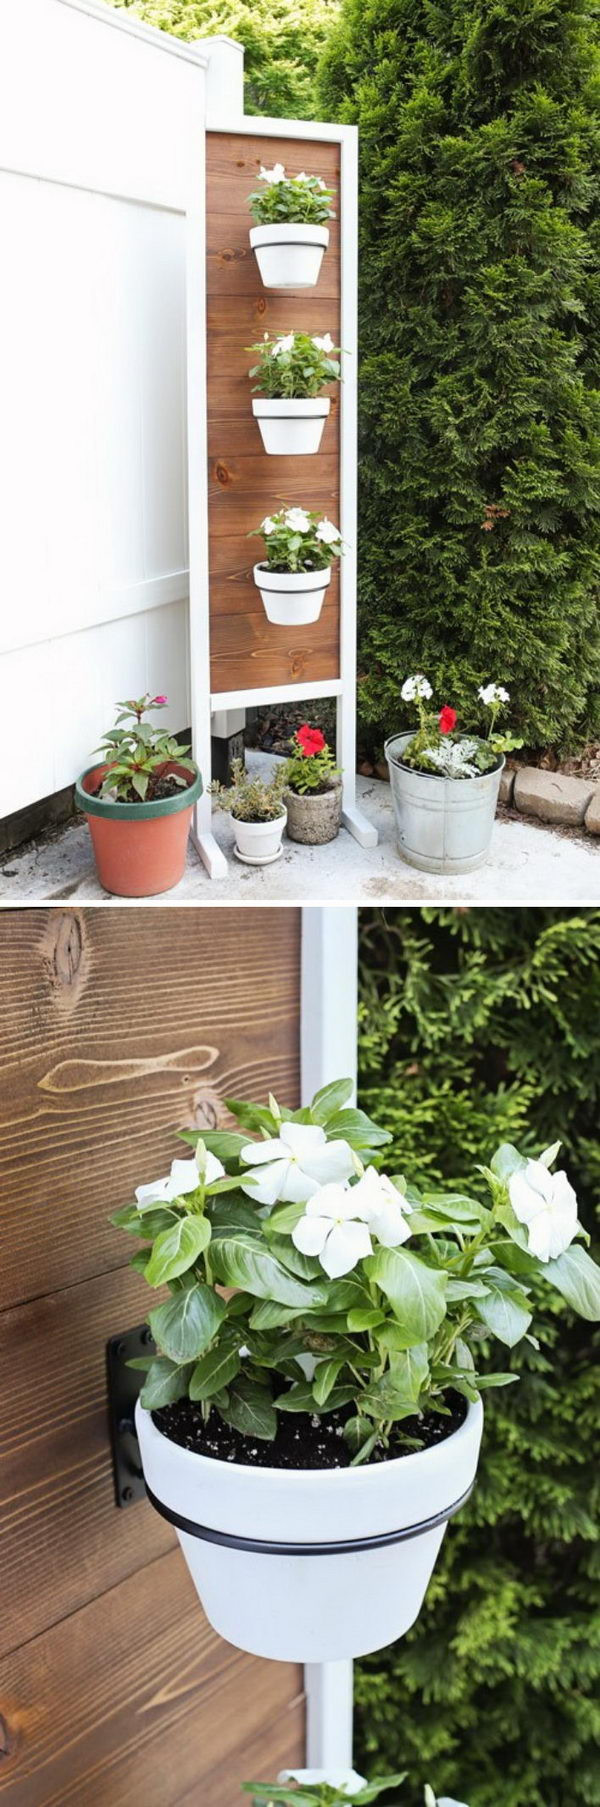 DIY Outdoor Plant Stand Ideas
 25 DIY Plant Stands With Thrift Store Finds Hative